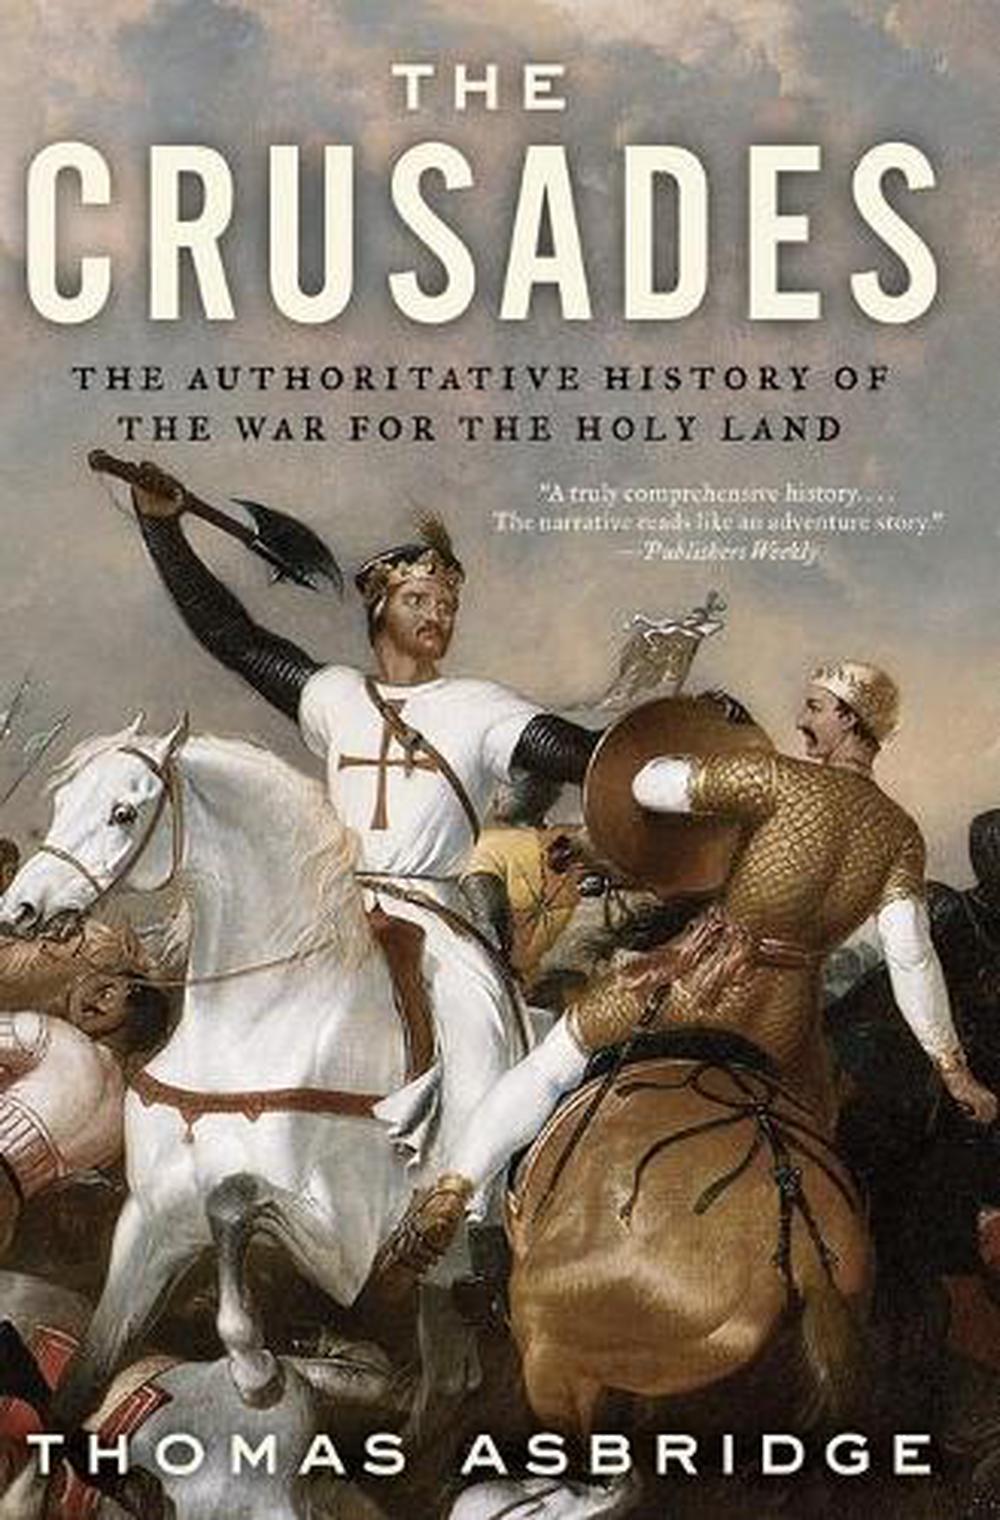 The Crusades The Authoritative History of the War for the Holy Land by